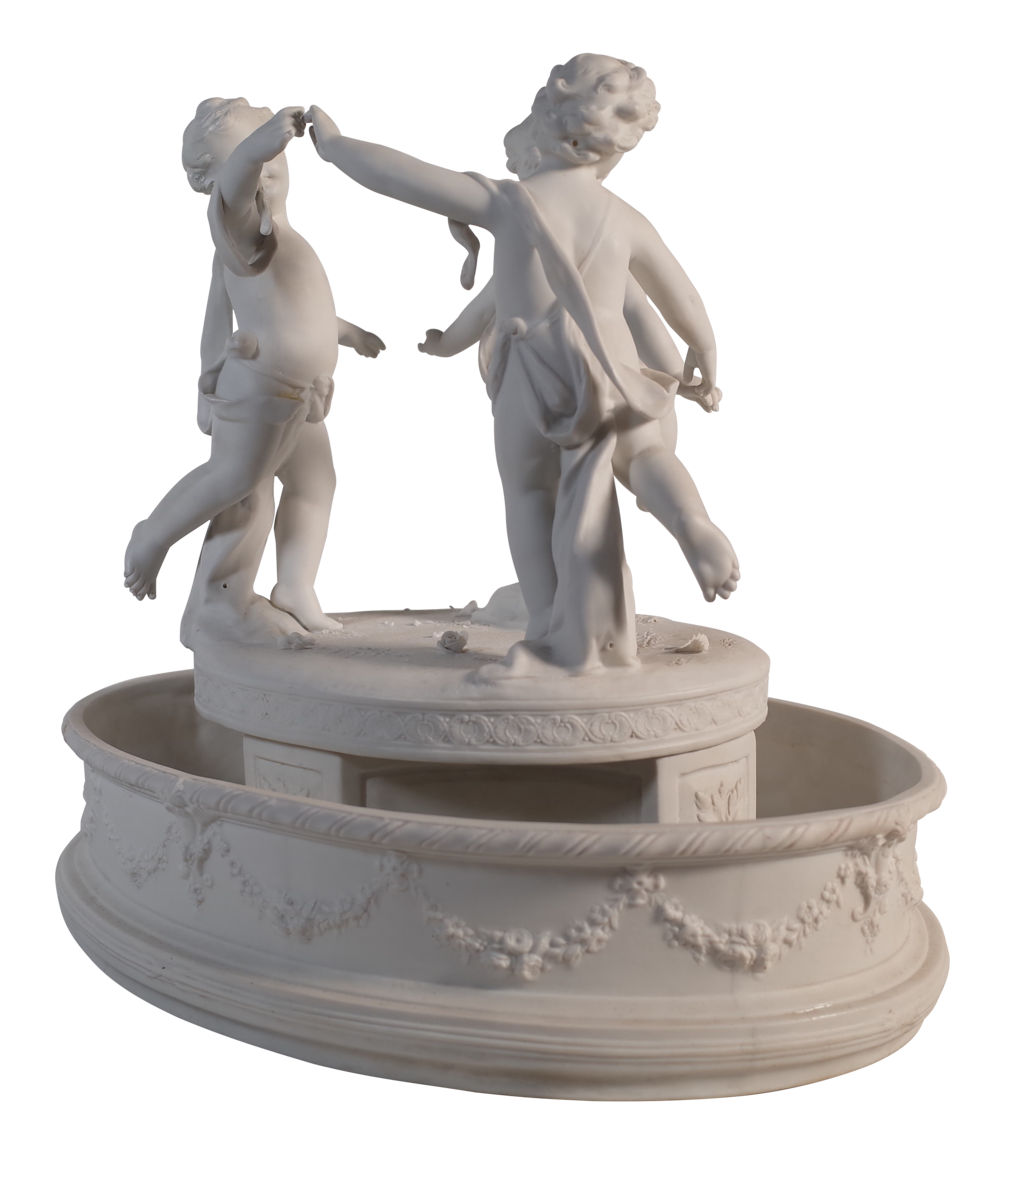 Parian Ware Circular Centrepiece of Three Putti Dancing Within a Large Bowl Decorated with Floral Swags